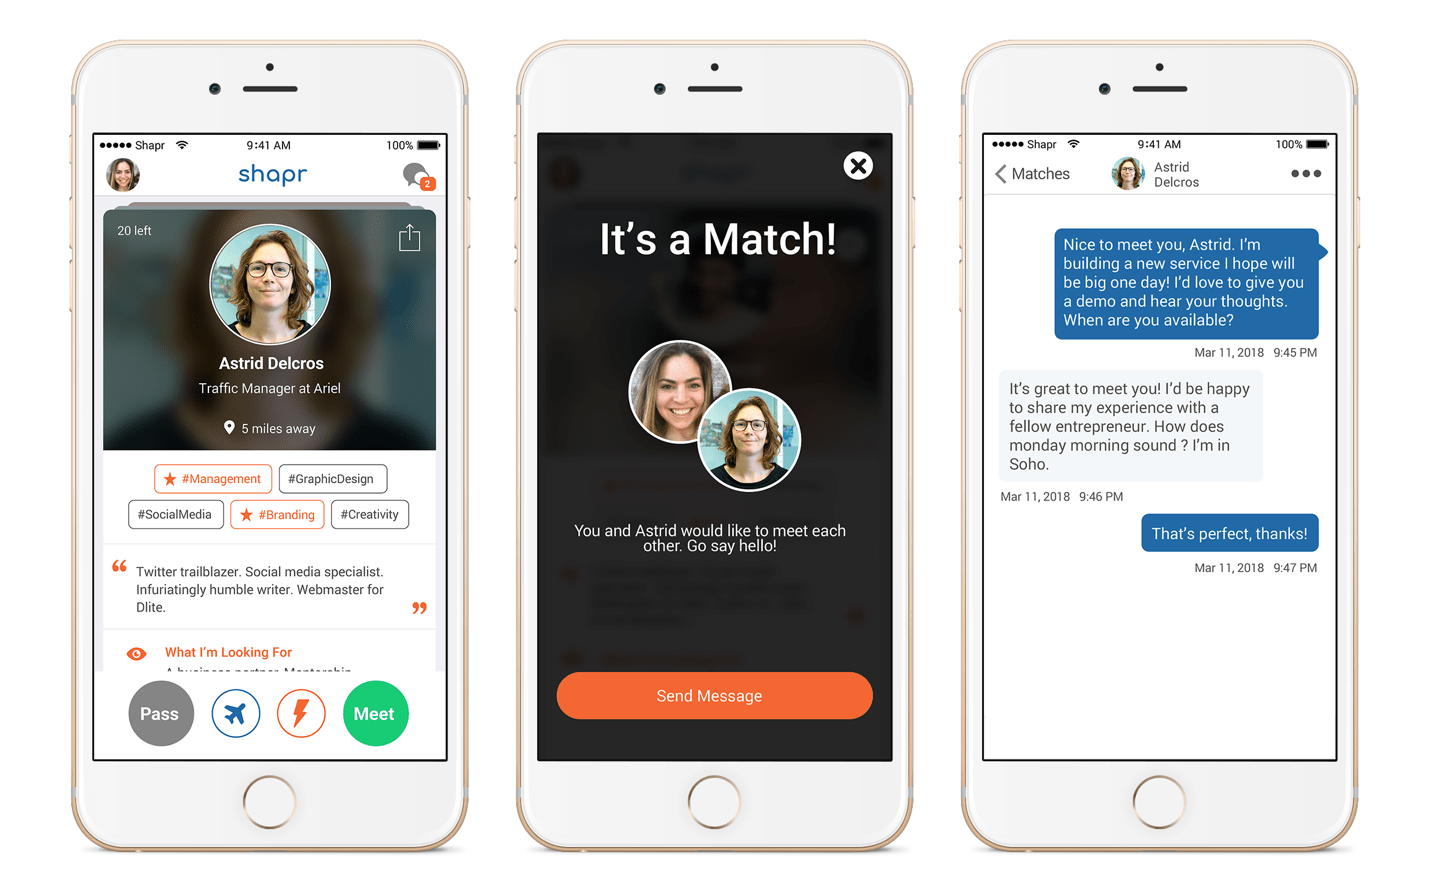 This app is leveraging machine learning to make networking easier